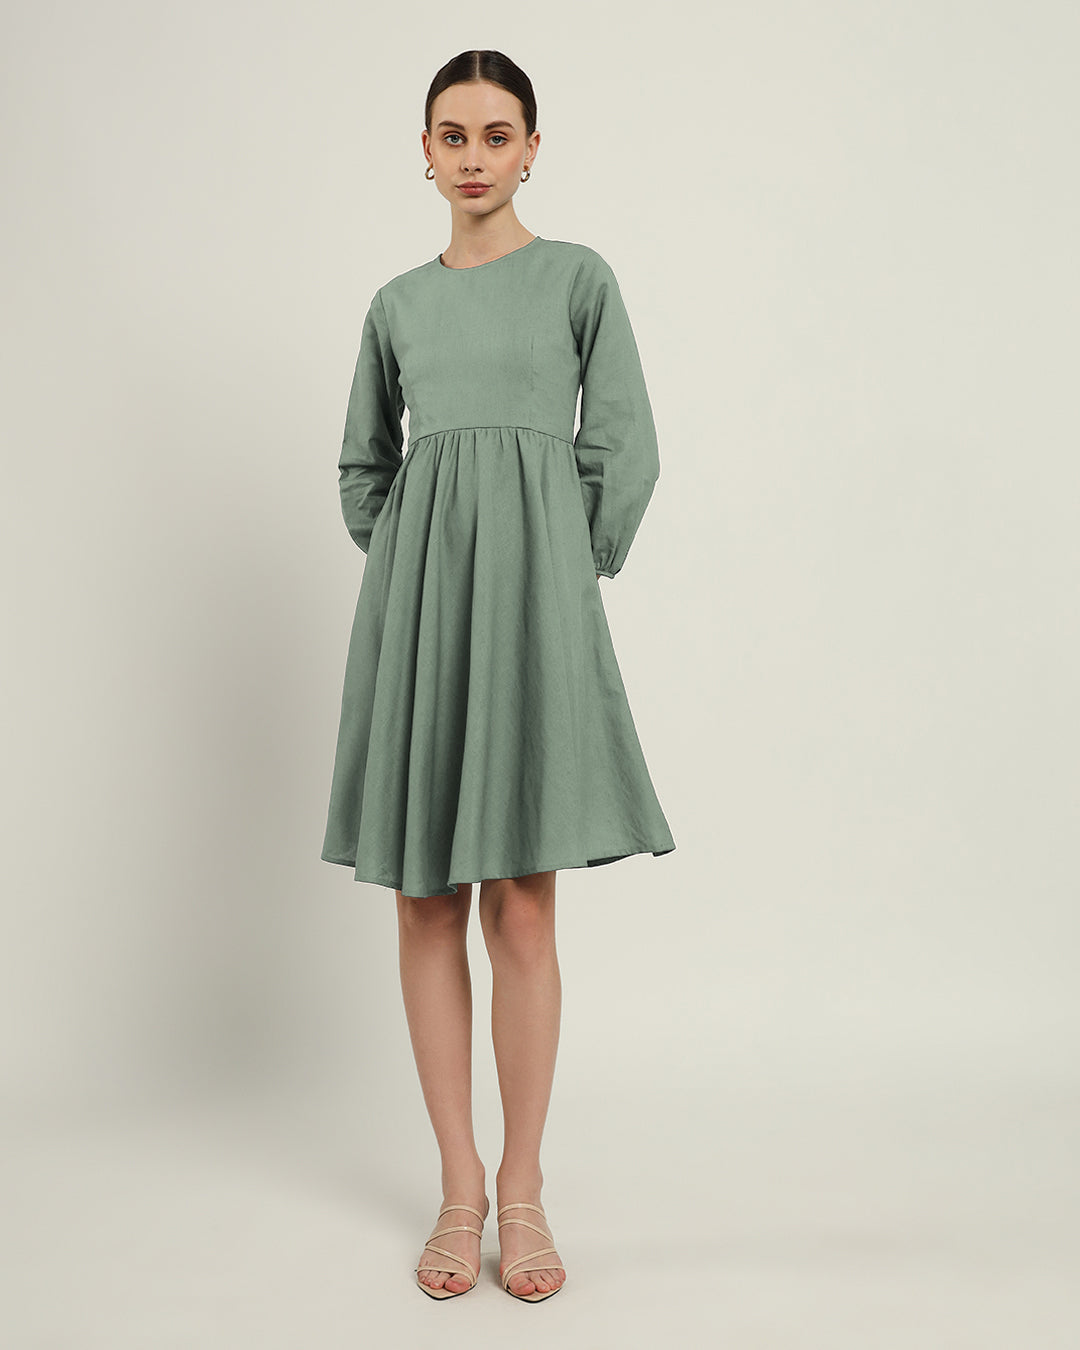 The Exeter Mint Cotton Dress